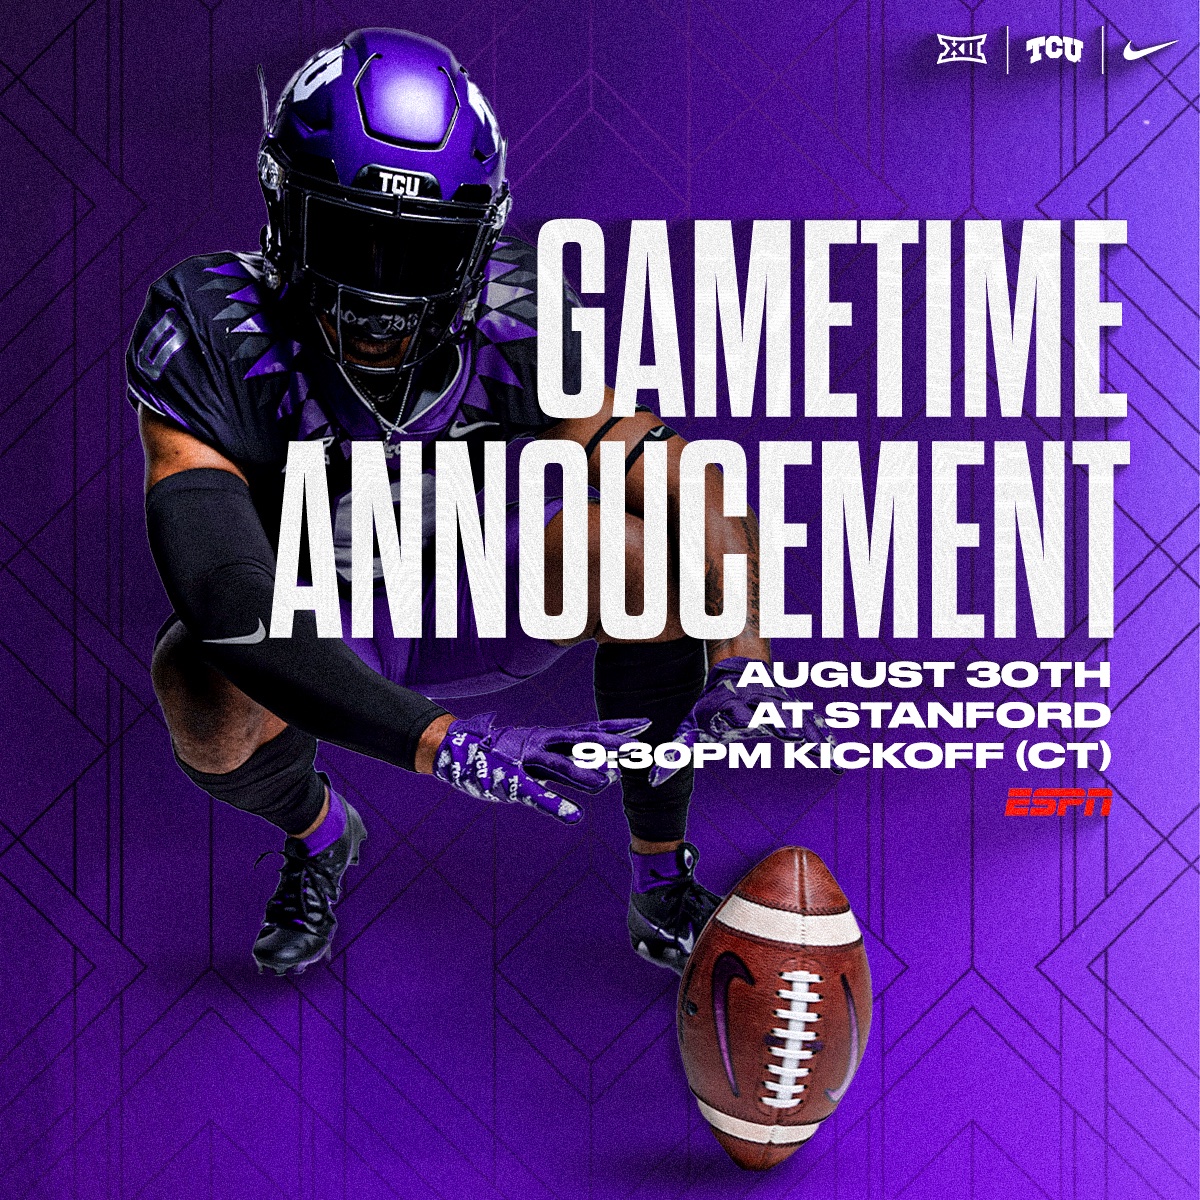 Our game time against Stanford is official! Kickoff is at 9:30PM (CT)! The game will be broadcast on ESPN! #BleedPurple | #GoFrogs